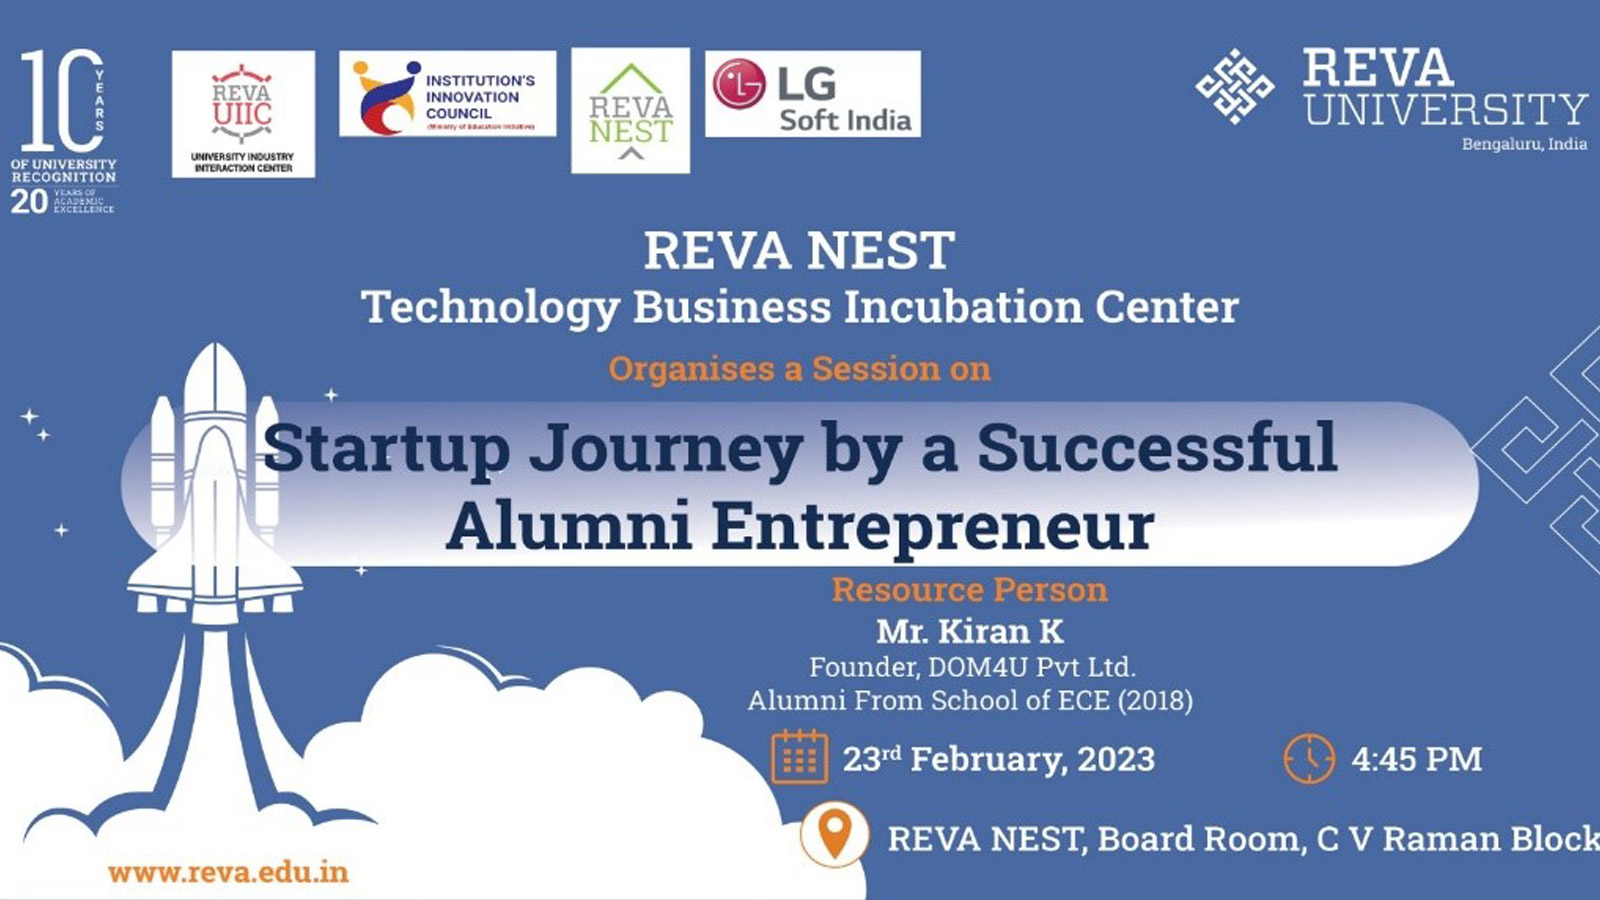 Session on Startup Journey by a Successful Alumni Entrepreneur